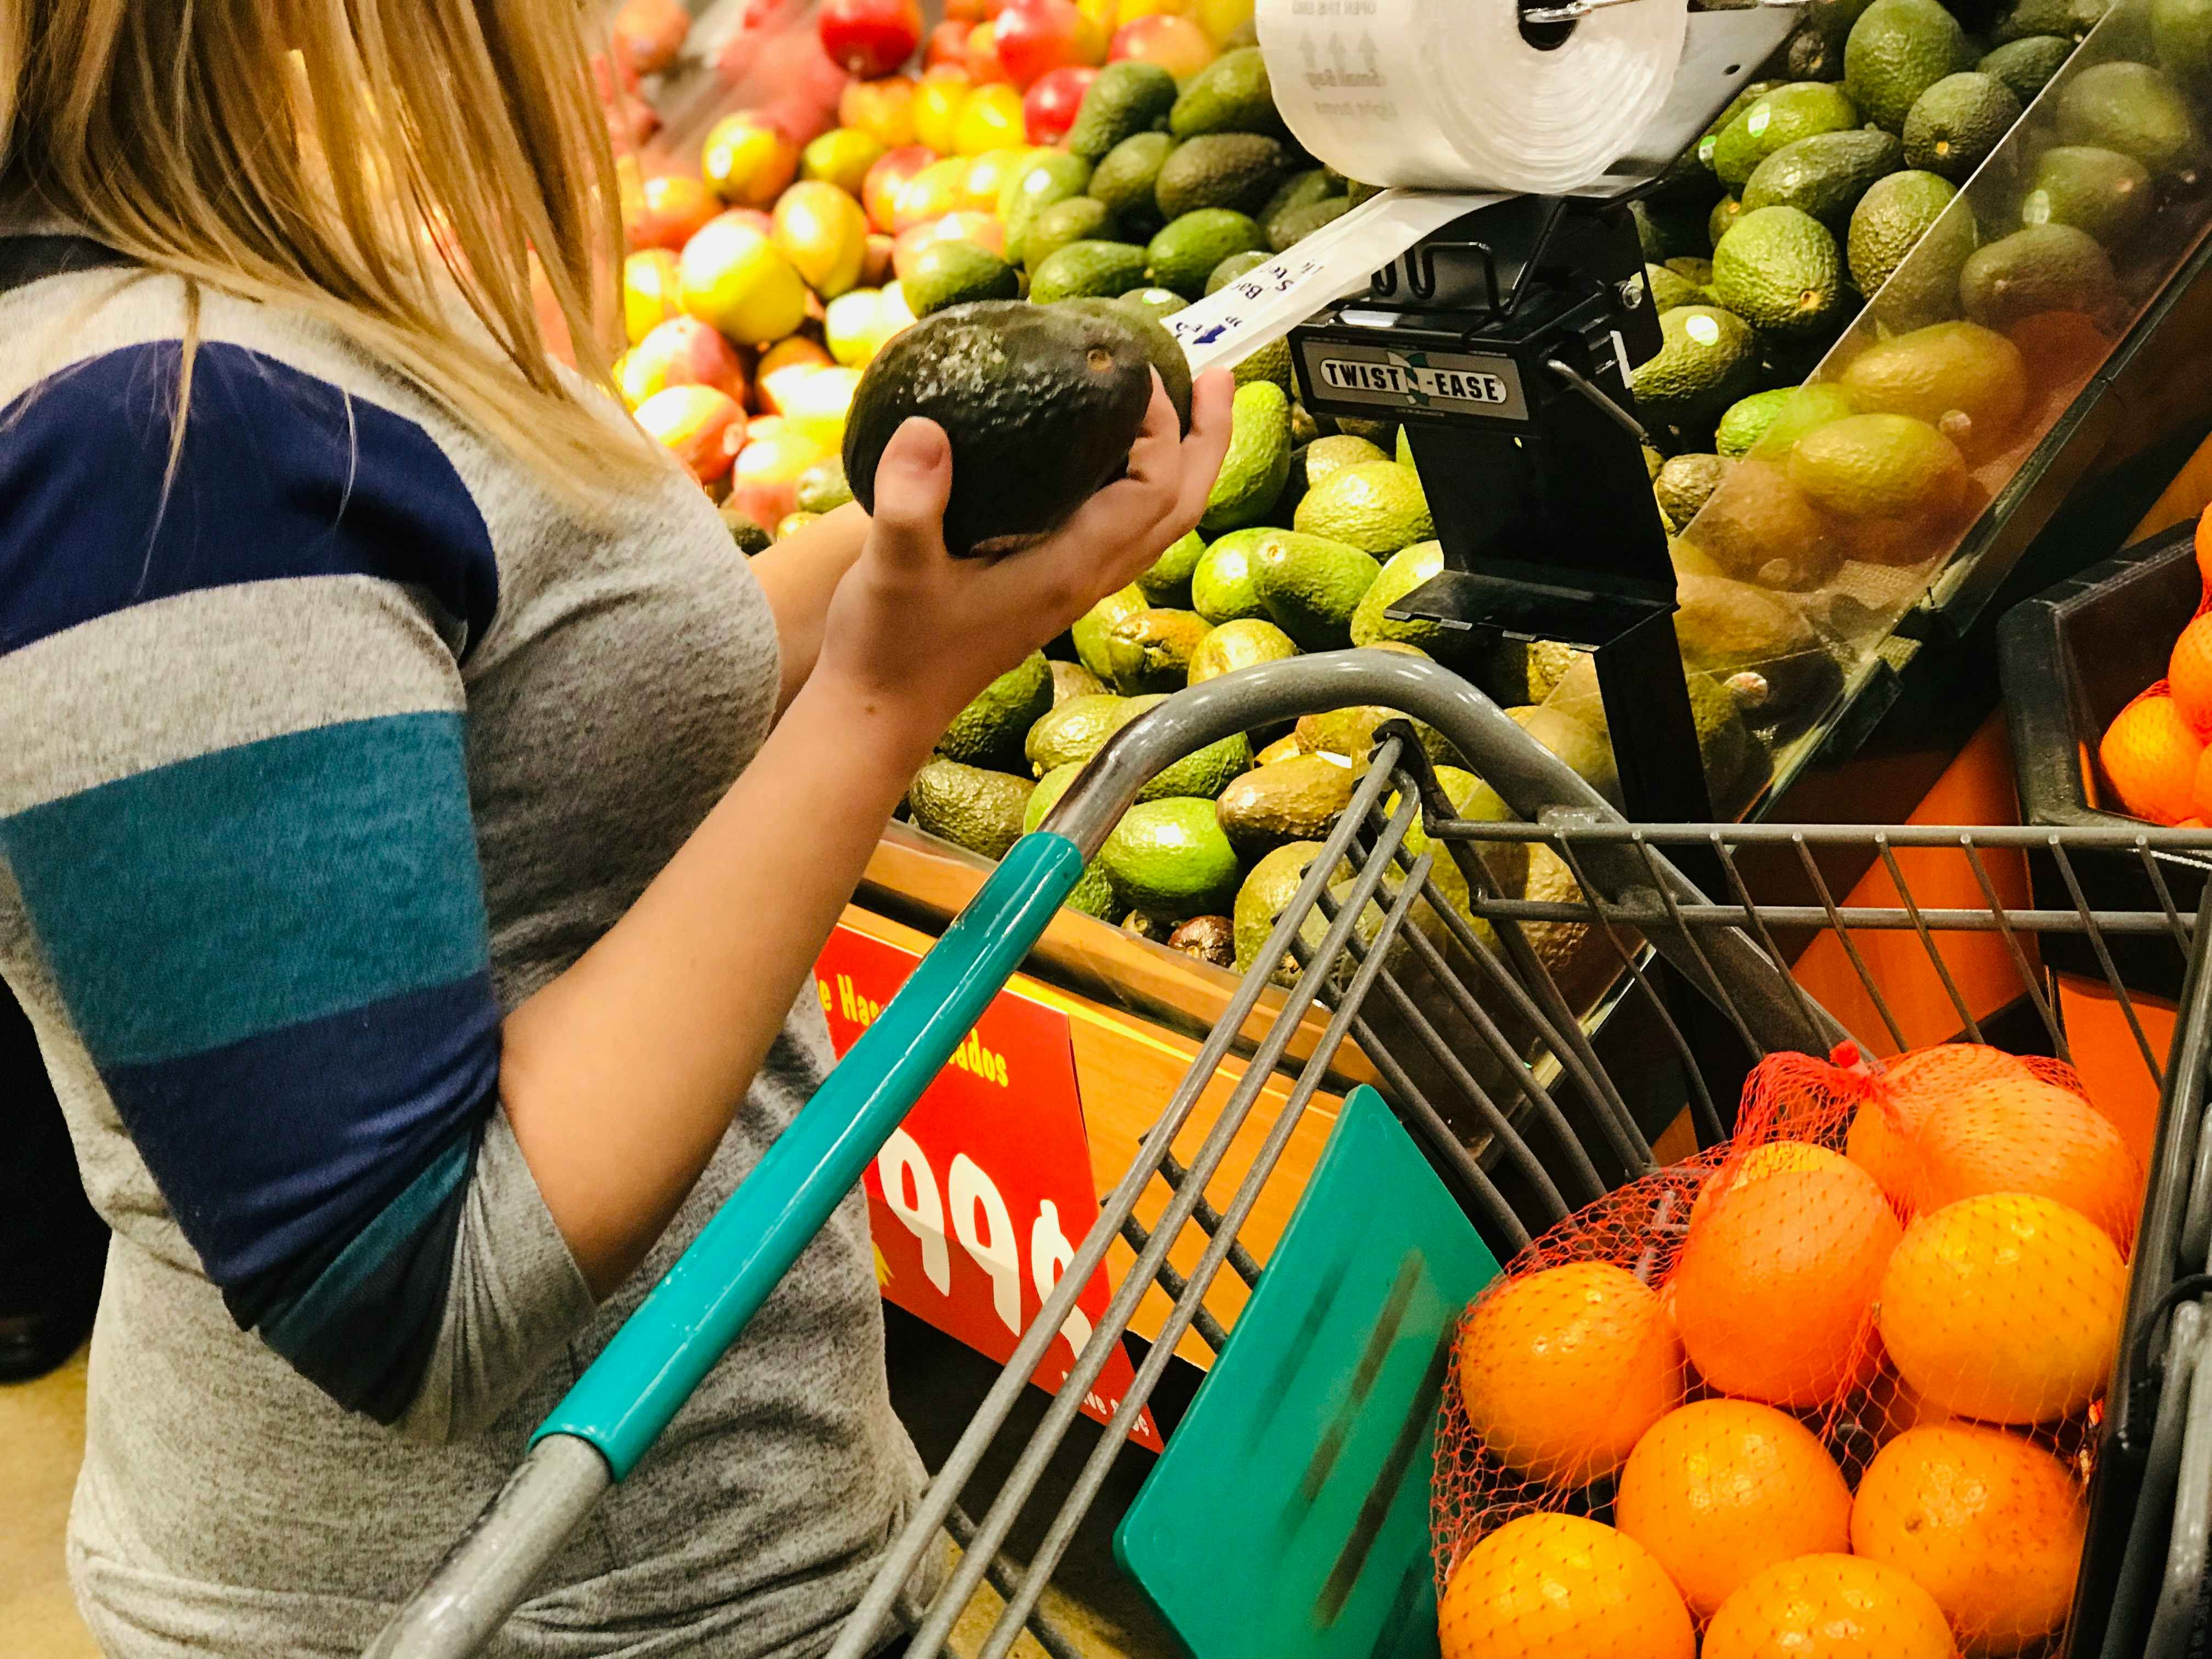 Woman about to bag an avocado in the produce aisle of a grocery store.